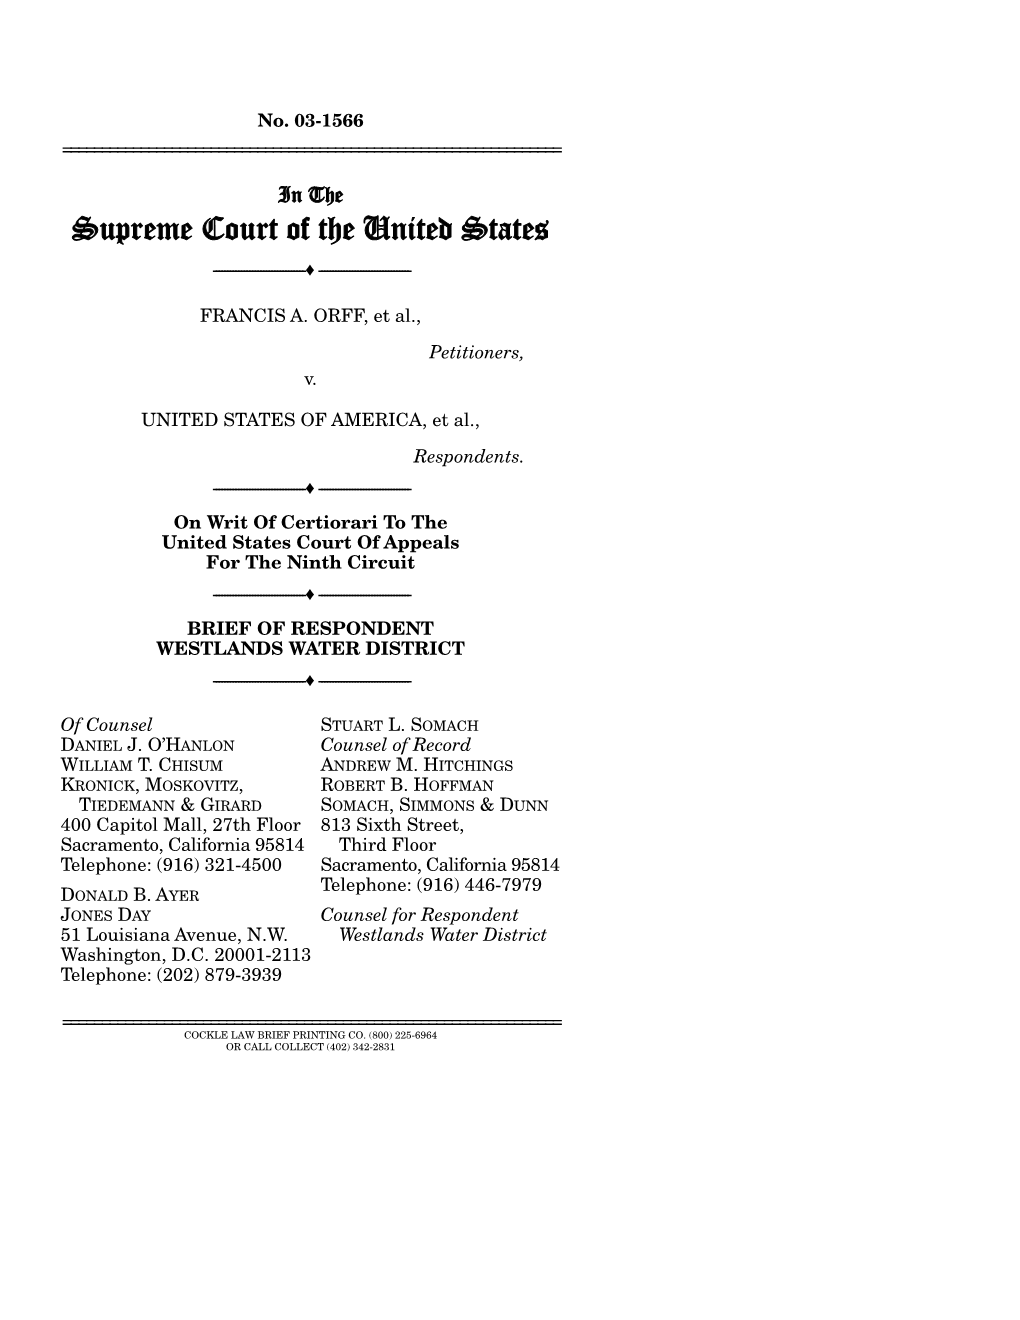 Brief for Respondent Westlands Water District in Orff V. United States, 03